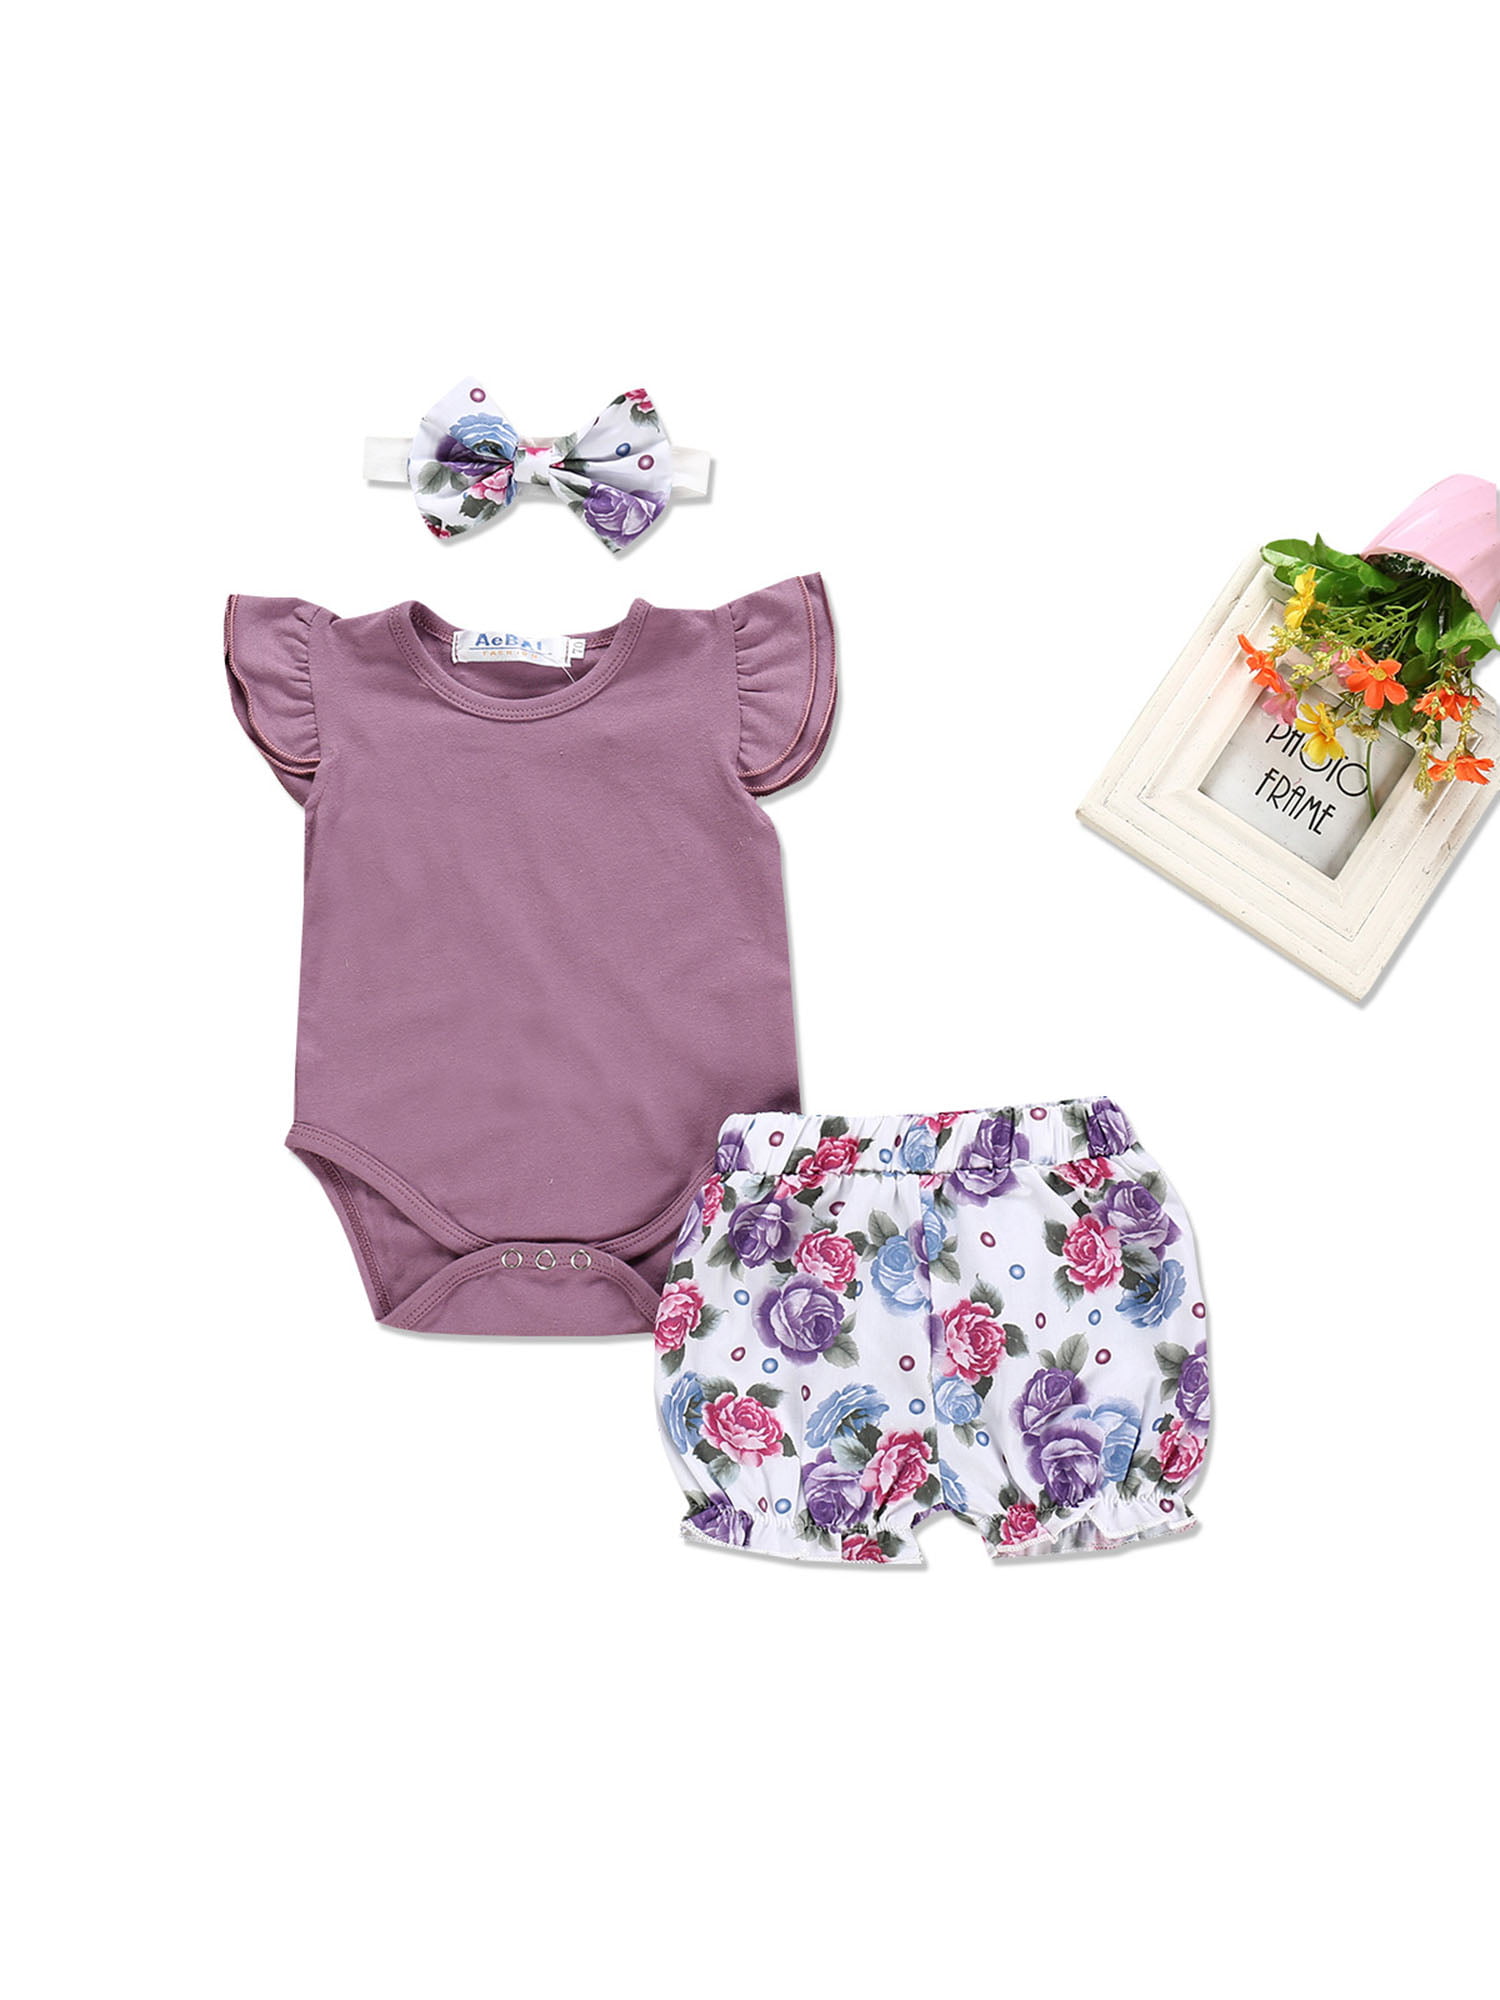 PatPat 3-piece Baby / Toddler Ruffled Bodysuit, Floral Shorts and Headband Set